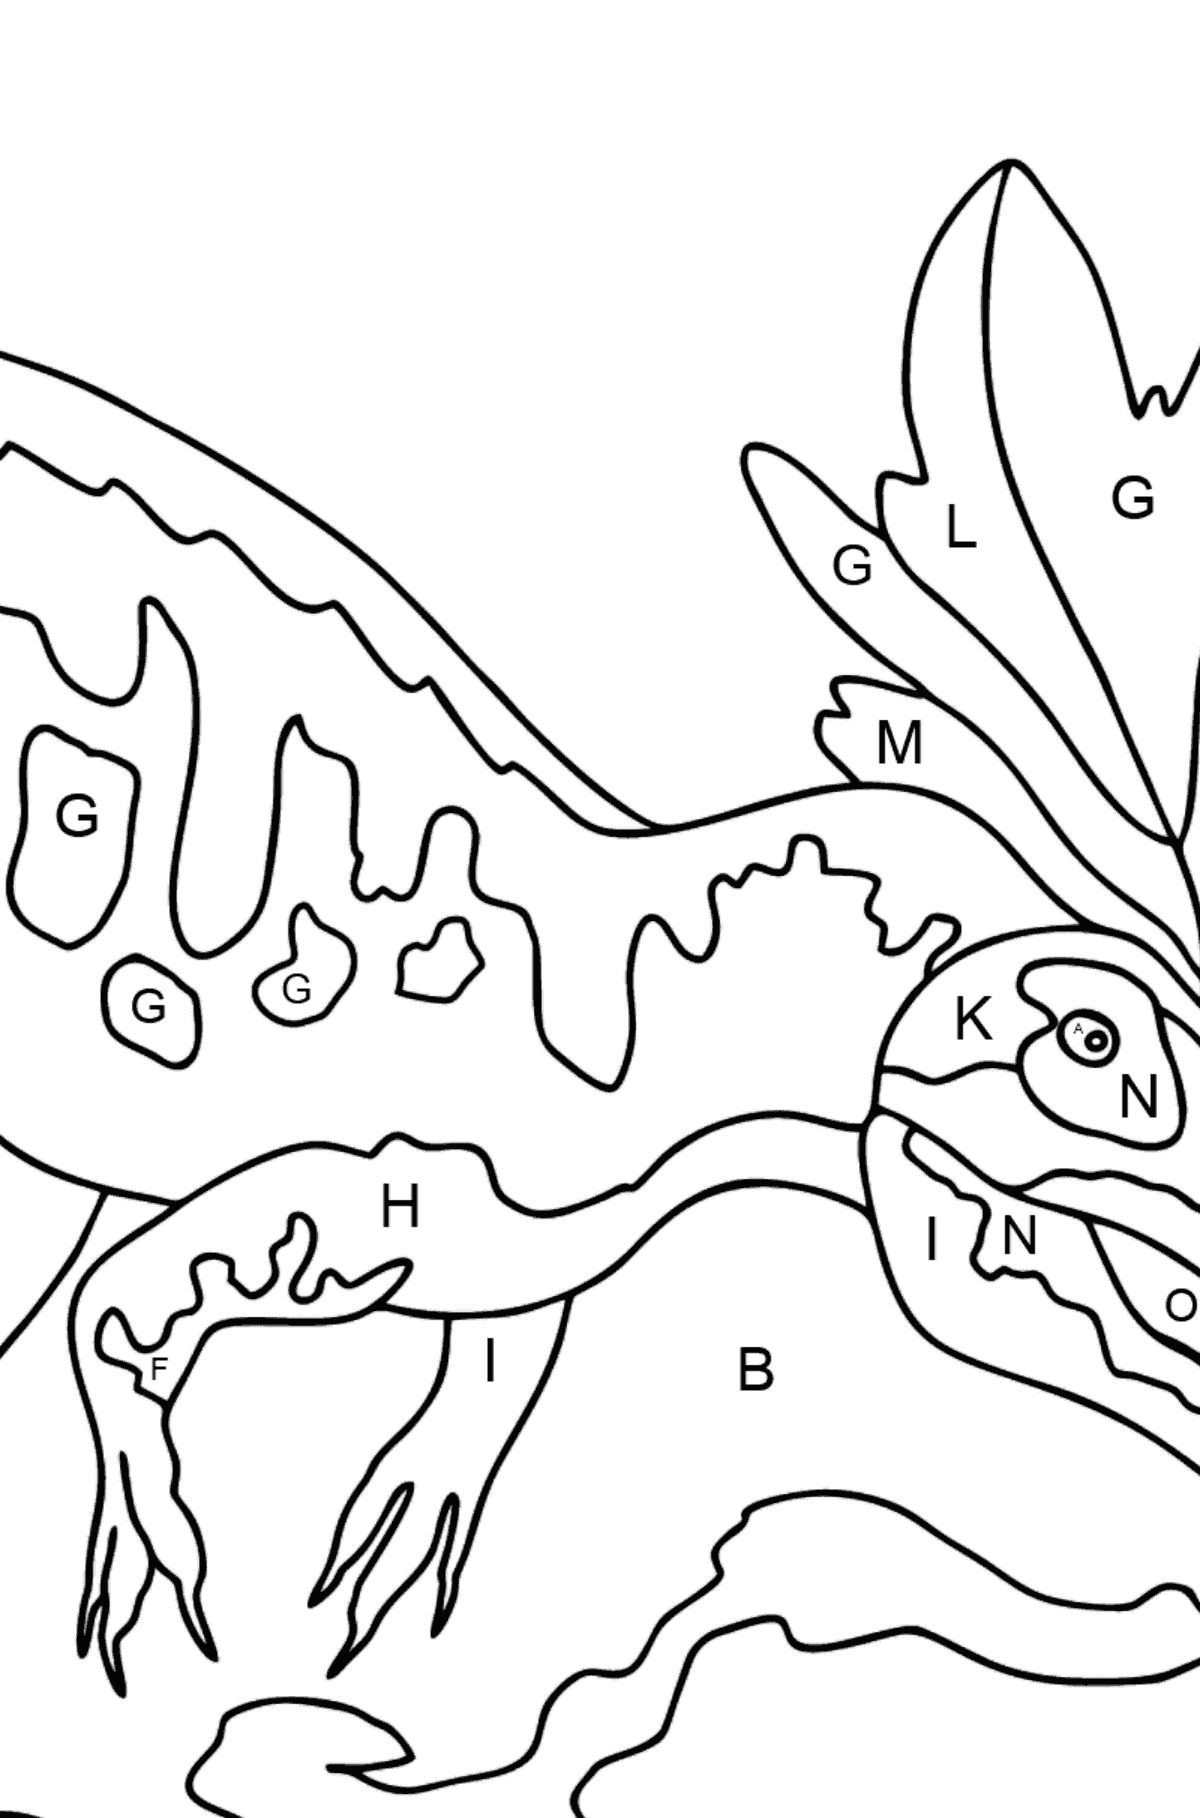 Coloring Page - Allosaurus - A Well-Researched Dinosaur - Coloring by Letters for Kids